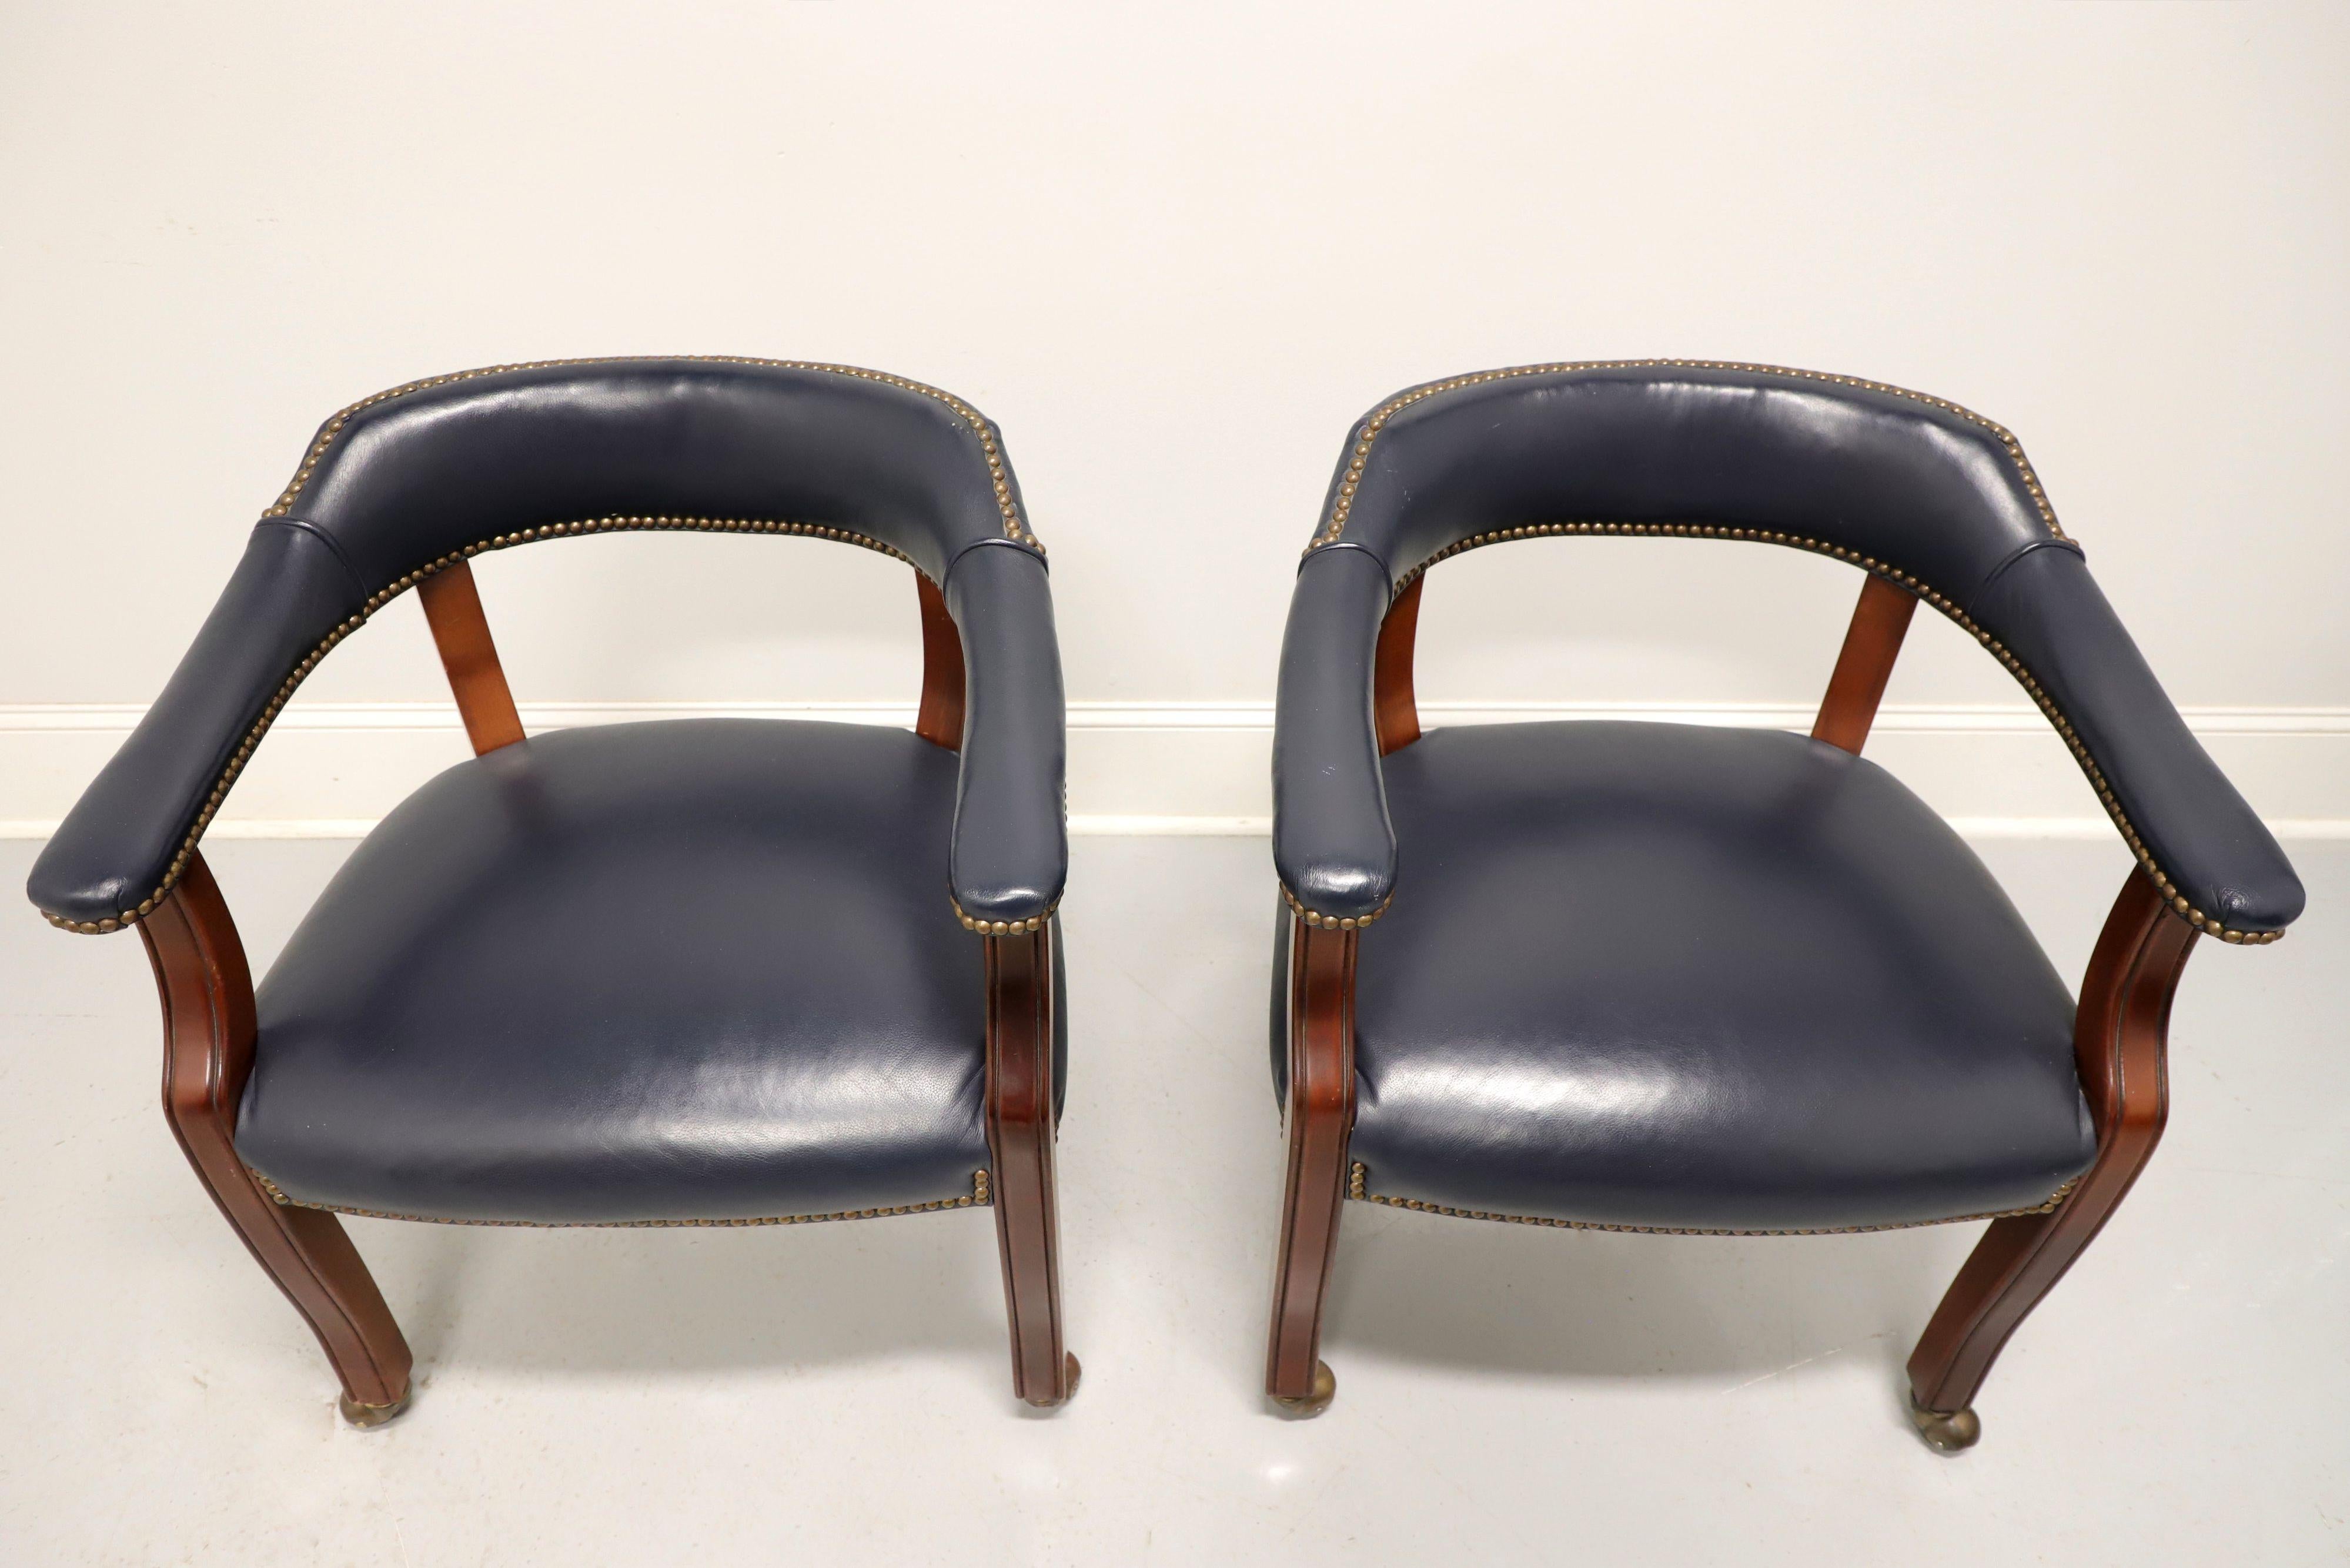 A pair of Traditional style game / club chairs on casters by Gordon's Furniture, of Johnson City, Tennessee, USA. Fruitwood frame with gray blue color leather upholstery, barrel back, brass nailhead trim, flared rear legs and straight front legs on